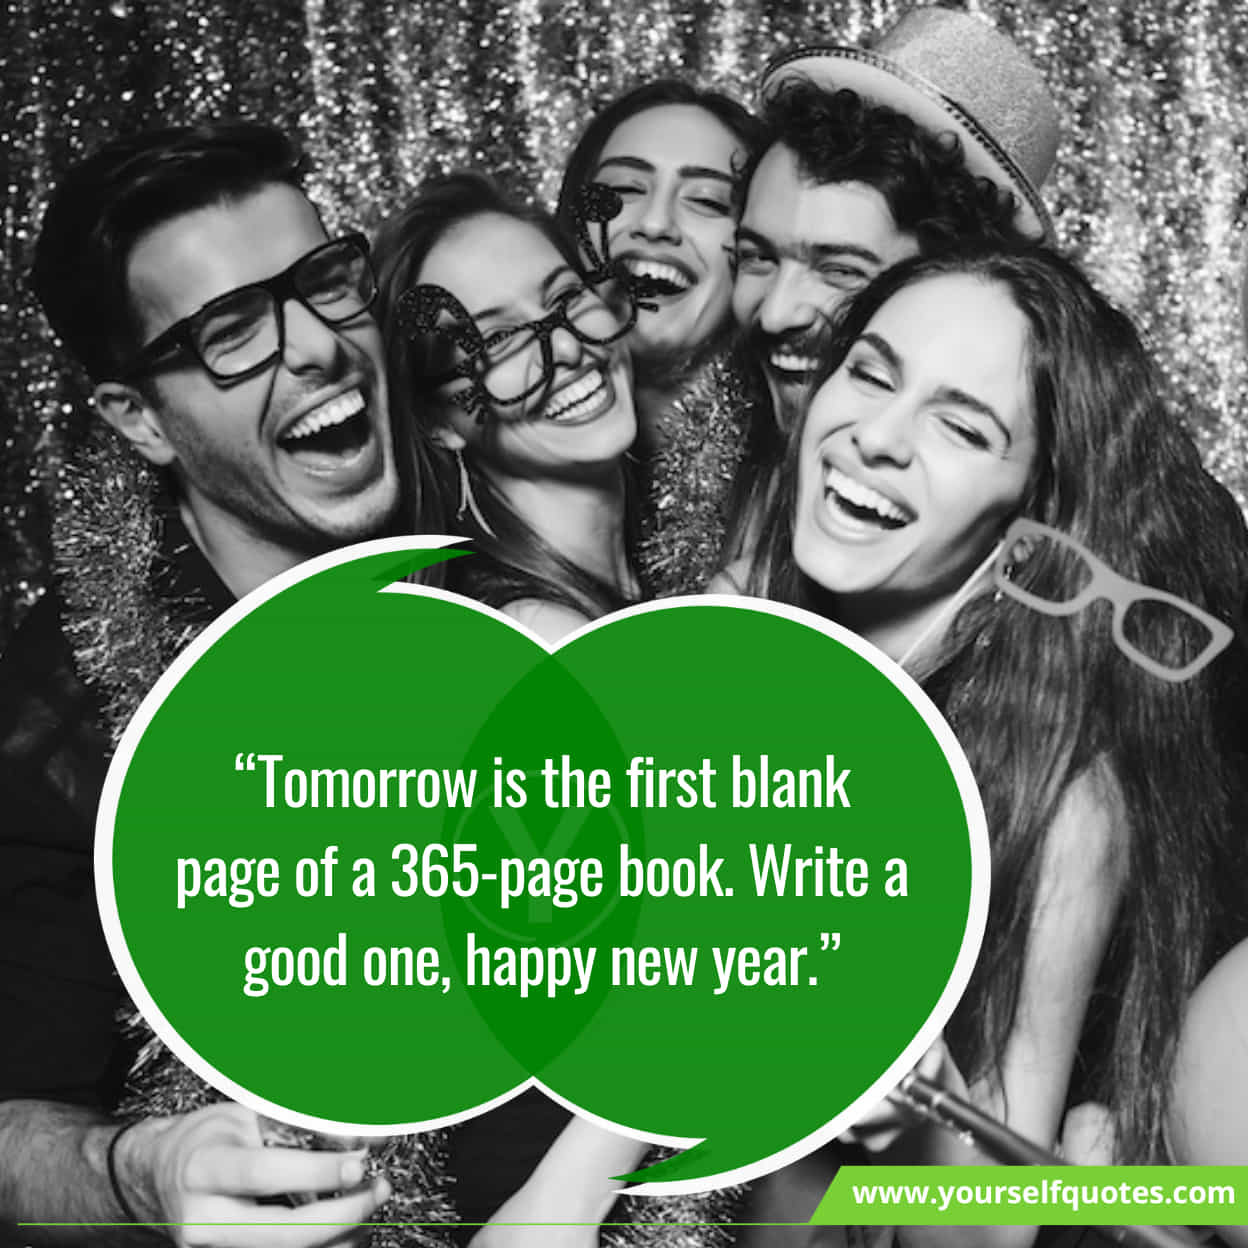 Encouraging Quotes For New Year Celebration